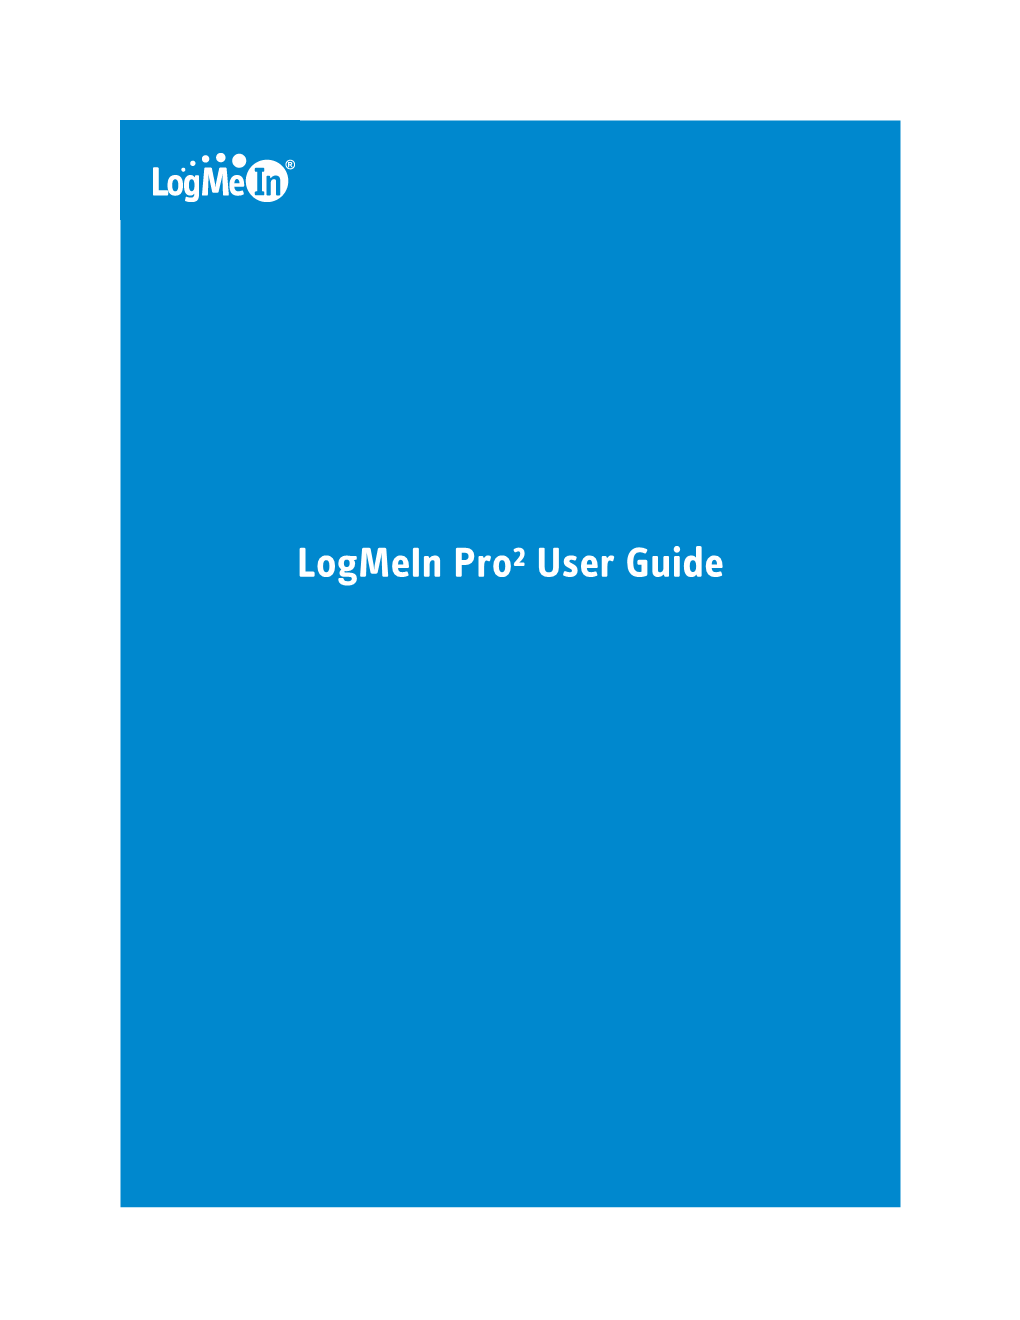 Logmein Pro² User Guide Contents